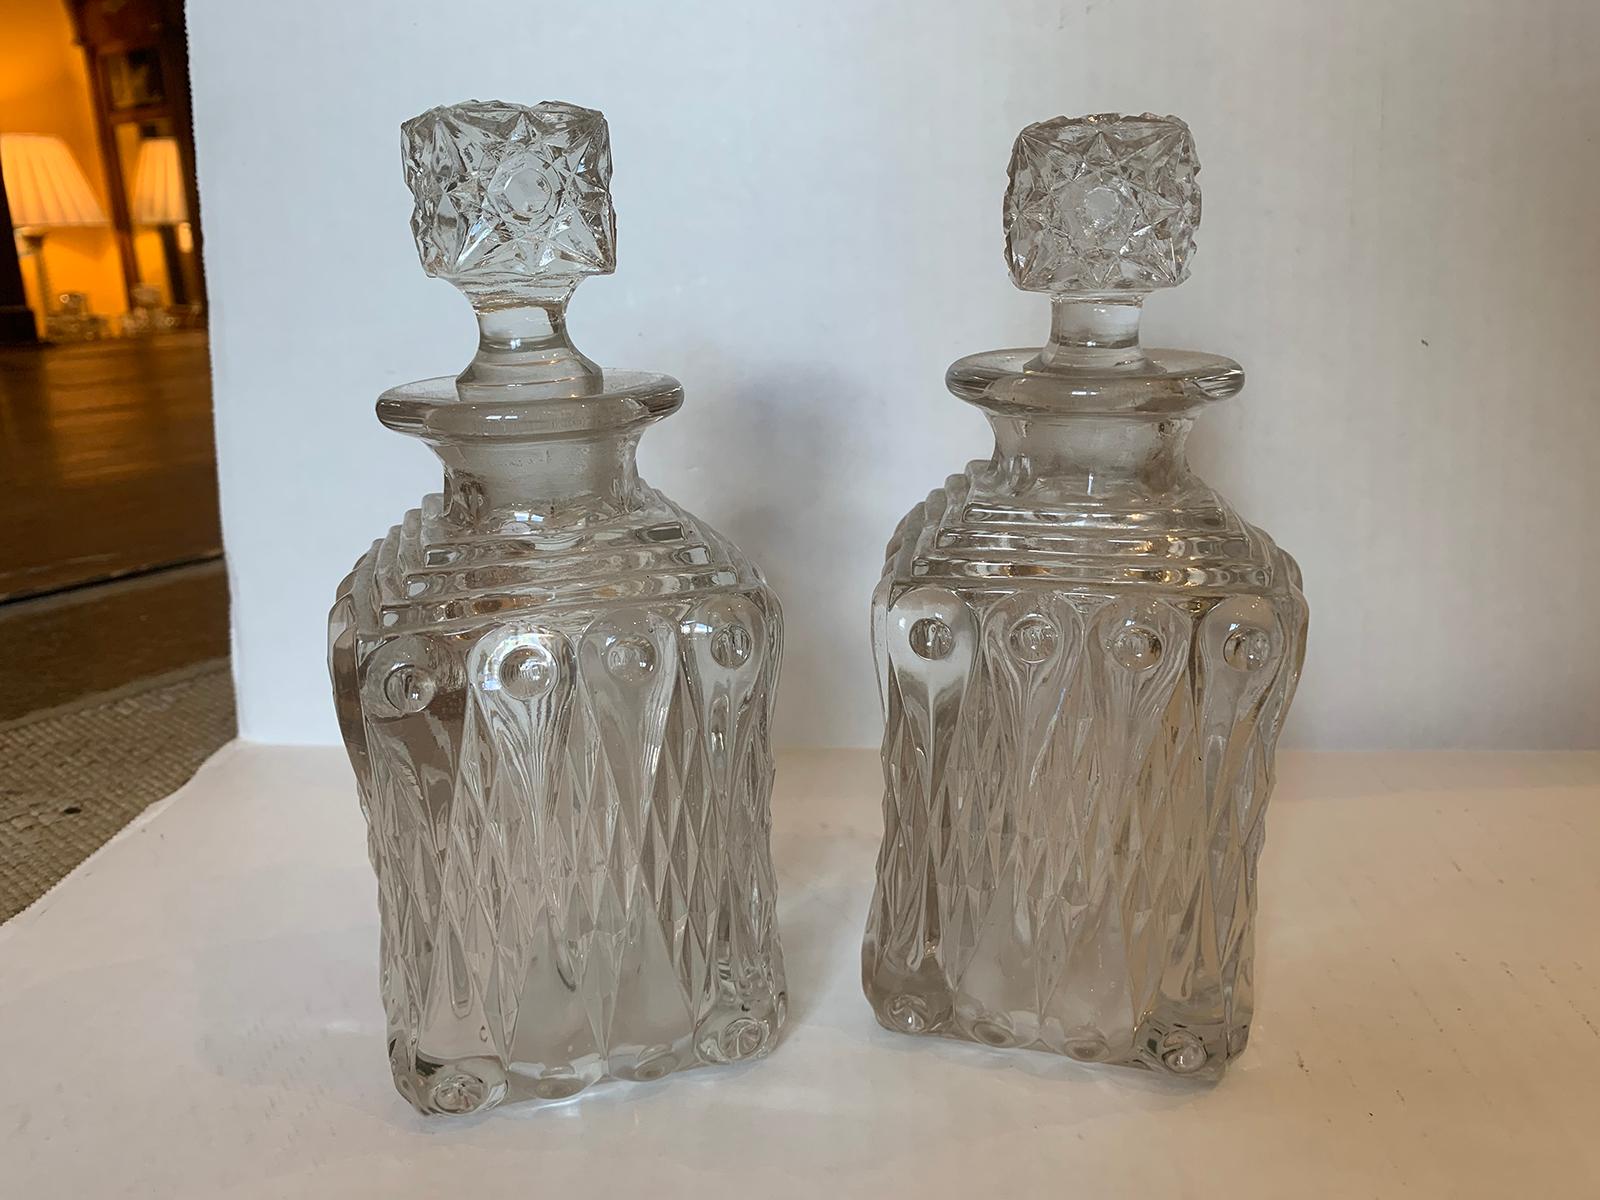 Pair of 20th century glass decanters.